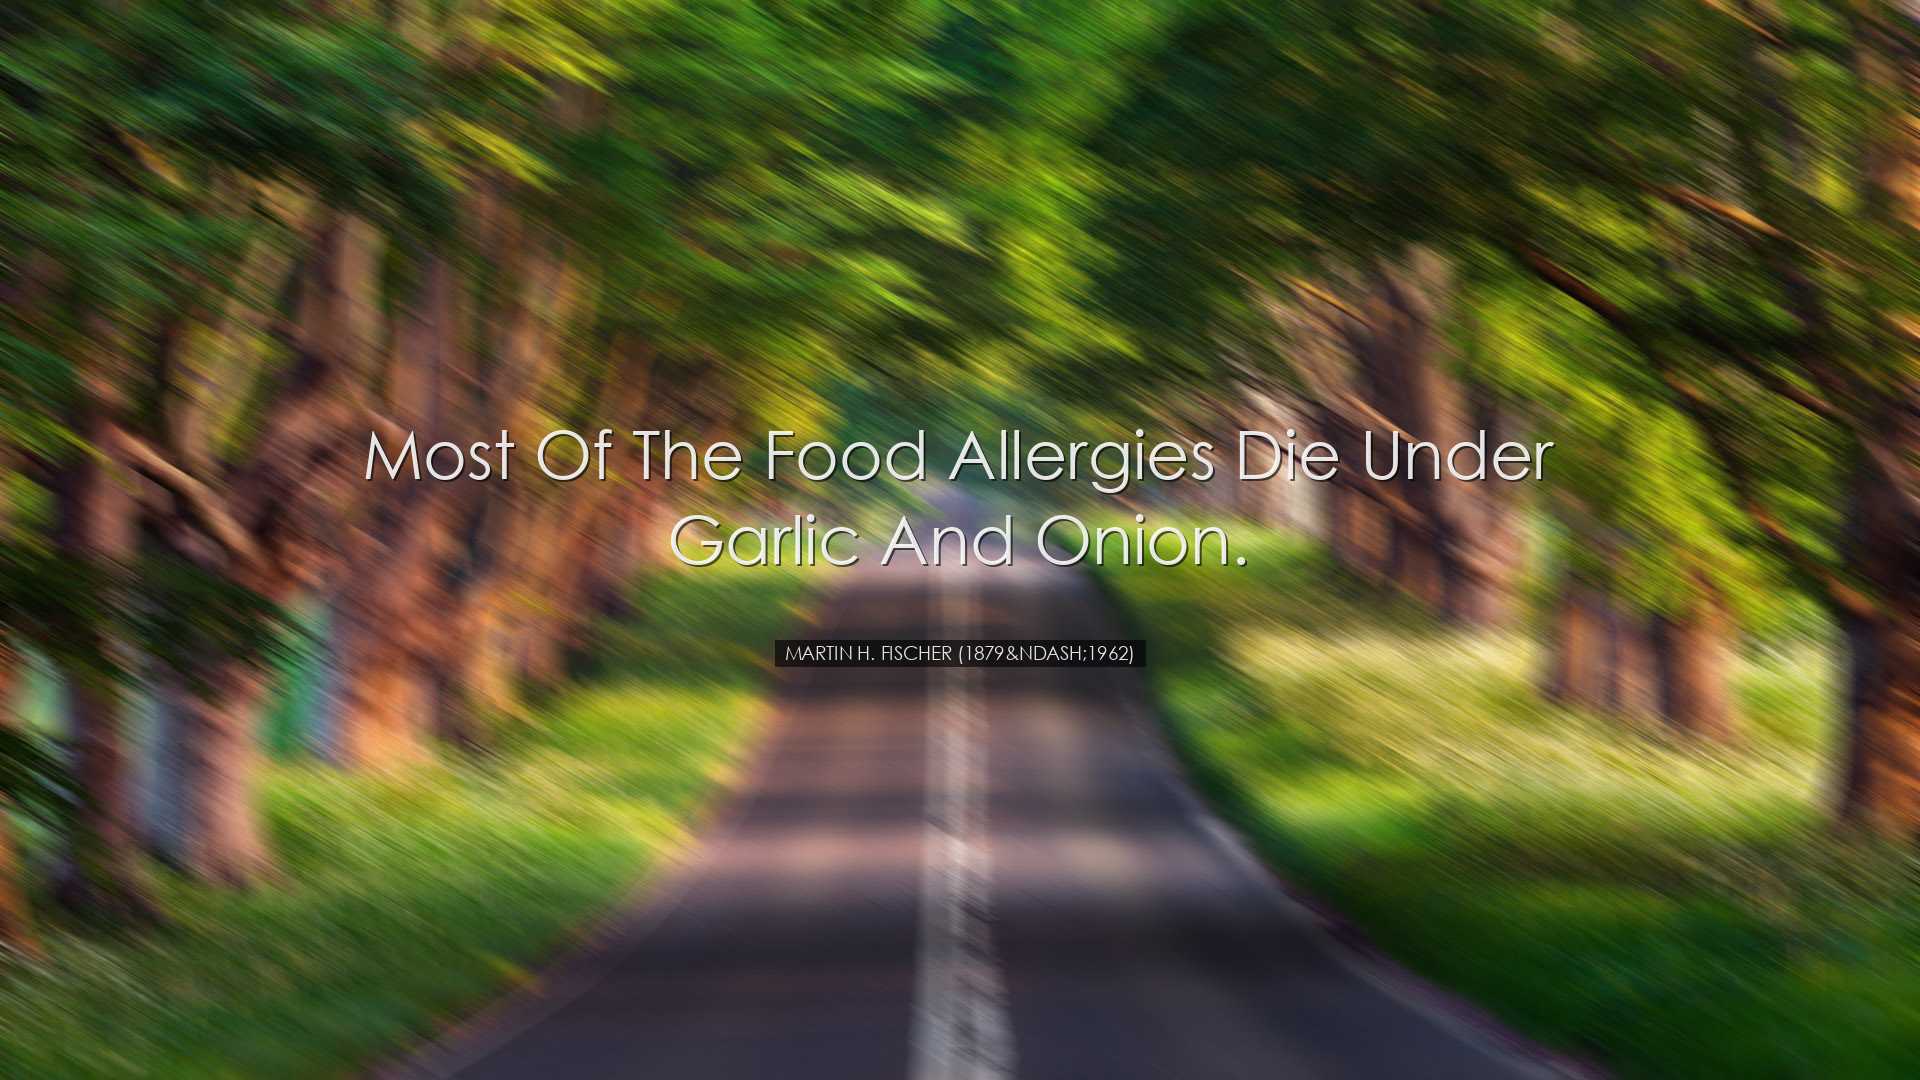 Most of the food allergies die under garlic and onion. - Martin H.